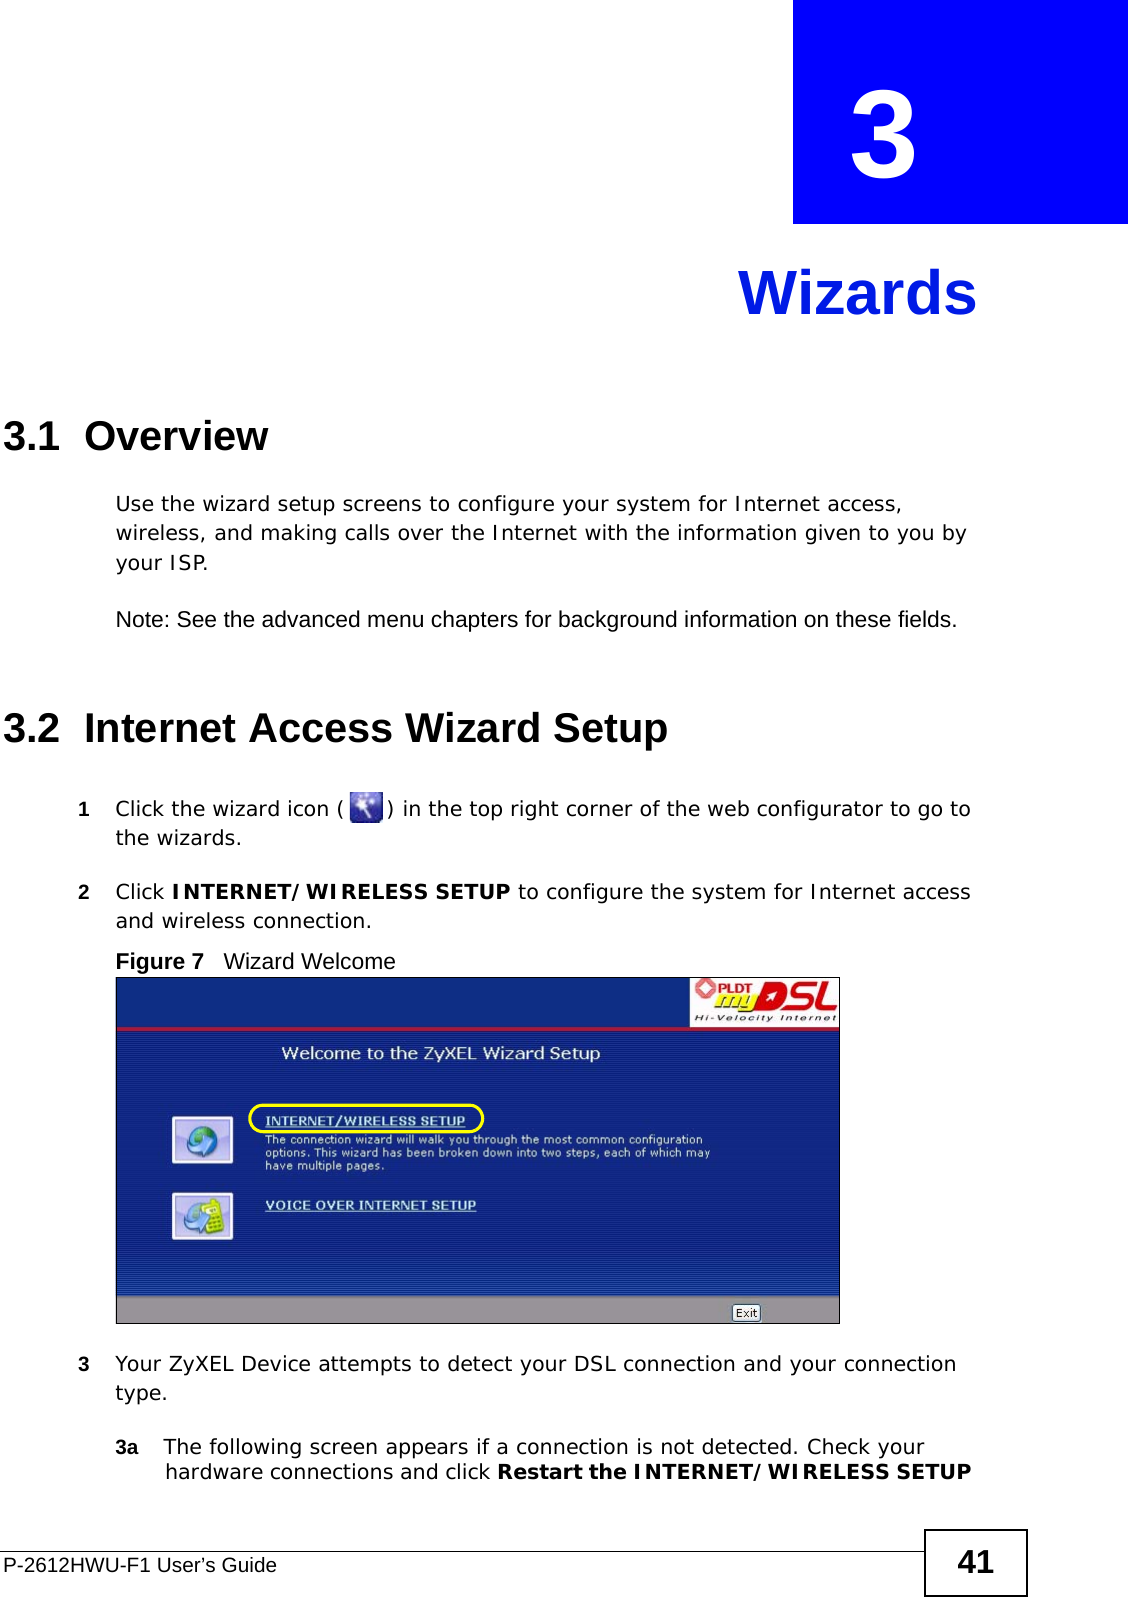 P-2612HWU-F1 User’s Guide 41CHAPTER  3 Wizards3.1  OverviewUse the wizard setup screens to configure your system for Internet access, wireless, and making calls over the Internet with the information given to you by your ISP. Note: See the advanced menu chapters for background information on these fields.3.2  Internet Access Wizard Setup1Click the wizard icon ( ) in the top right corner of the web configurator to go to the wizards. 2Click INTERNET/WIRELESS SETUP to configure the system for Internet access and wireless connection.Figure 7   Wizard Welcome3Your ZyXEL Device attempts to detect your DSL connection and your connection type. 3a The following screen appears if a connection is not detected. Check your  hardware connections and click Restart the INTERNET/WIRELESS SETUP 